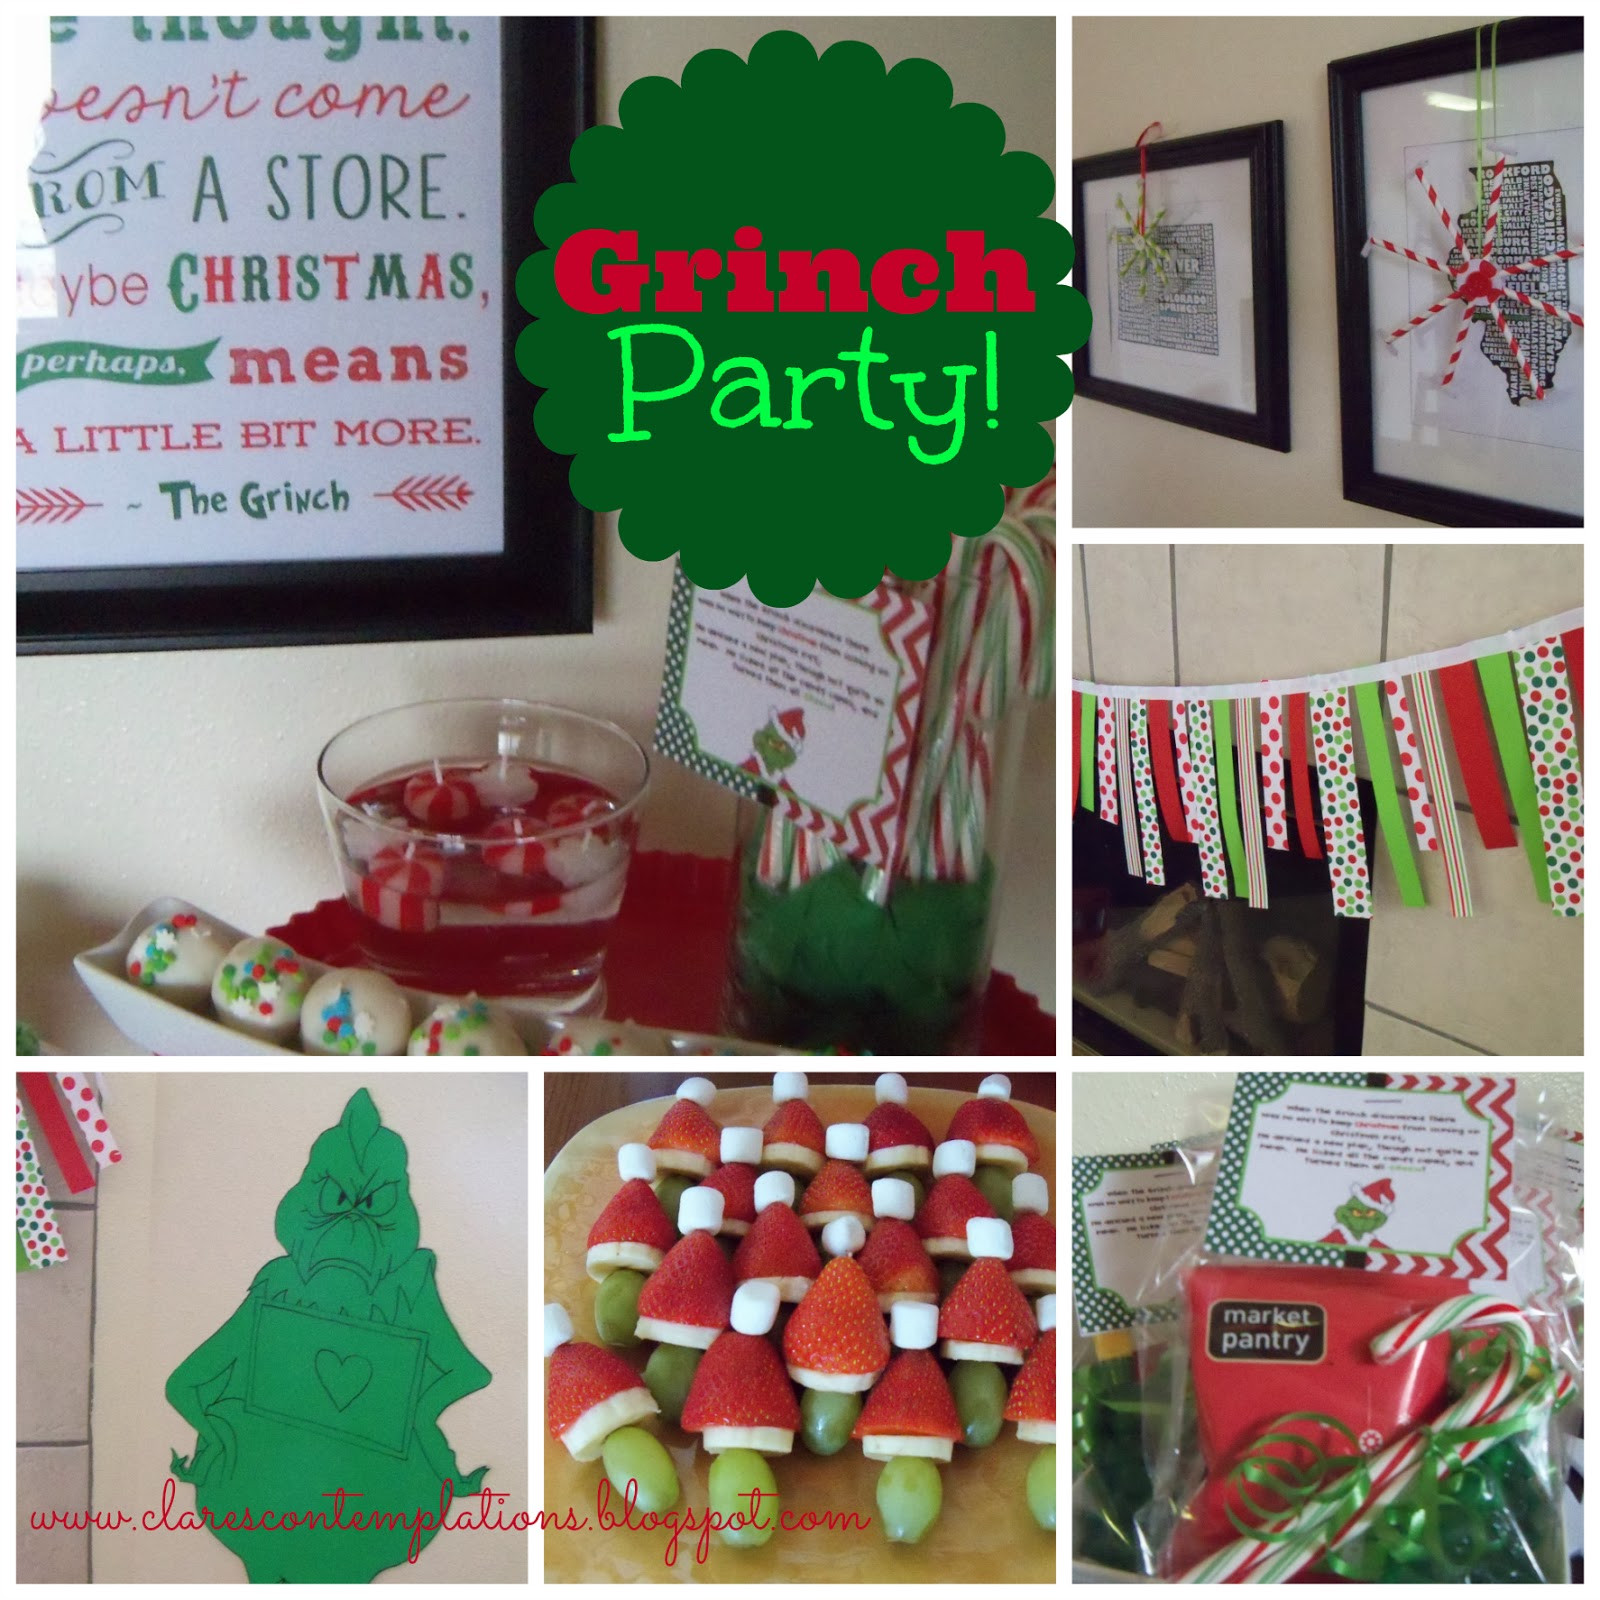 Great Christmas Party Ideas
 Clare s Contemplations Great Grinch Party